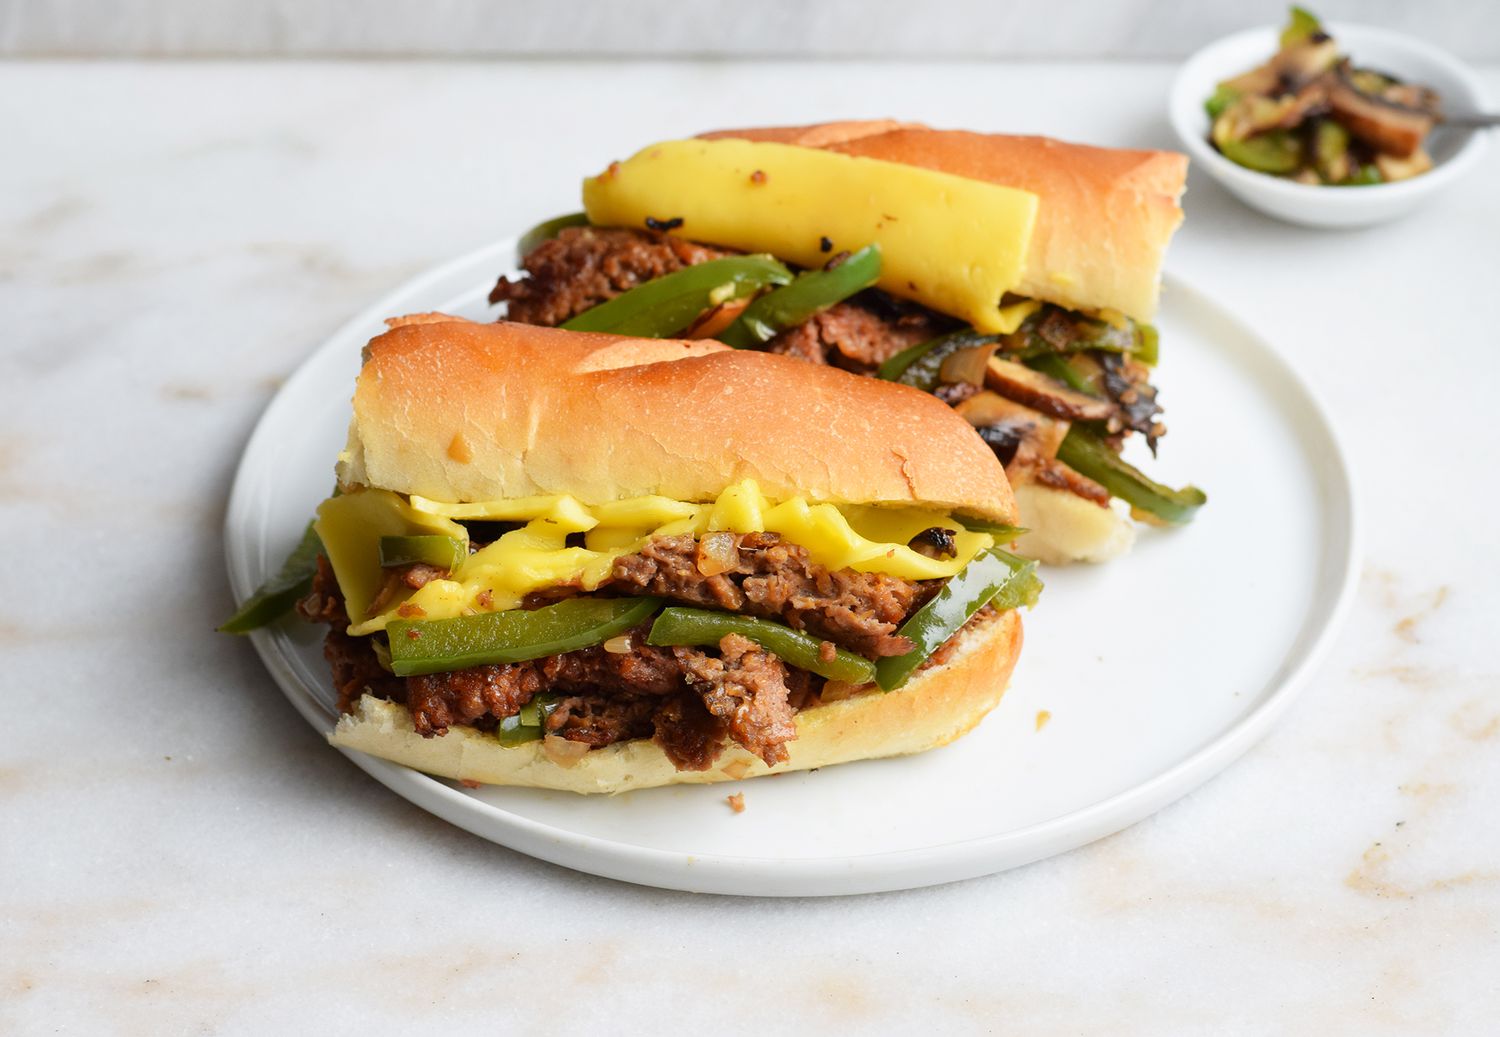 beyond meat Philly cheesesteak on a roll